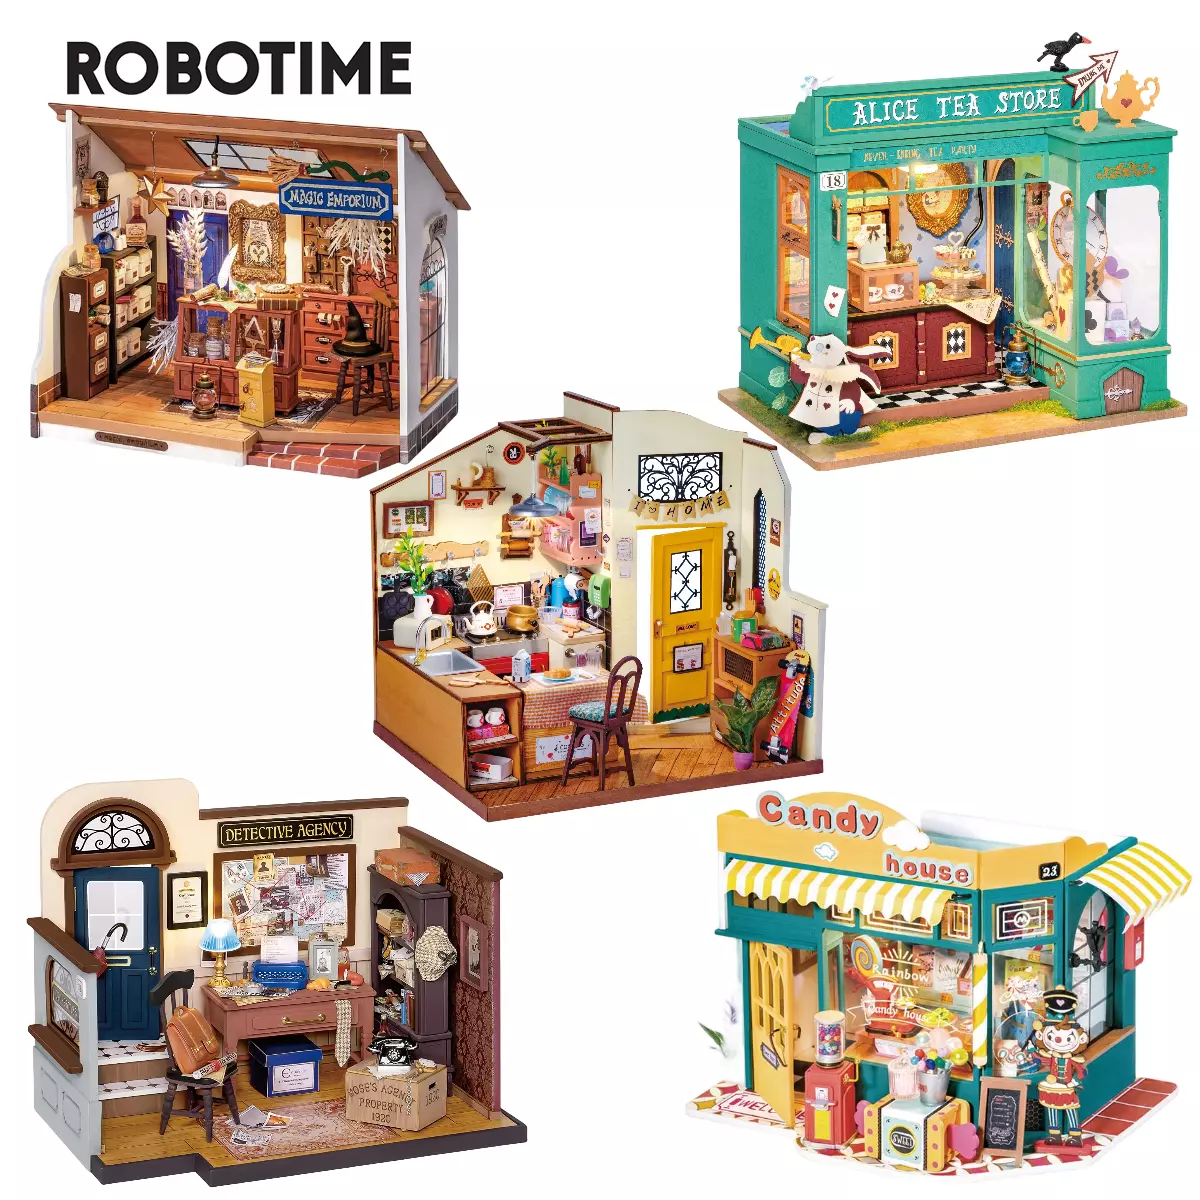 Rolife DIY Miniature Dollhouse Kit 1/24 Scale Tiny House Making Kit Home Decor Gifts for Adults & Teens (Honey Ice-cream Shop), Multicolor